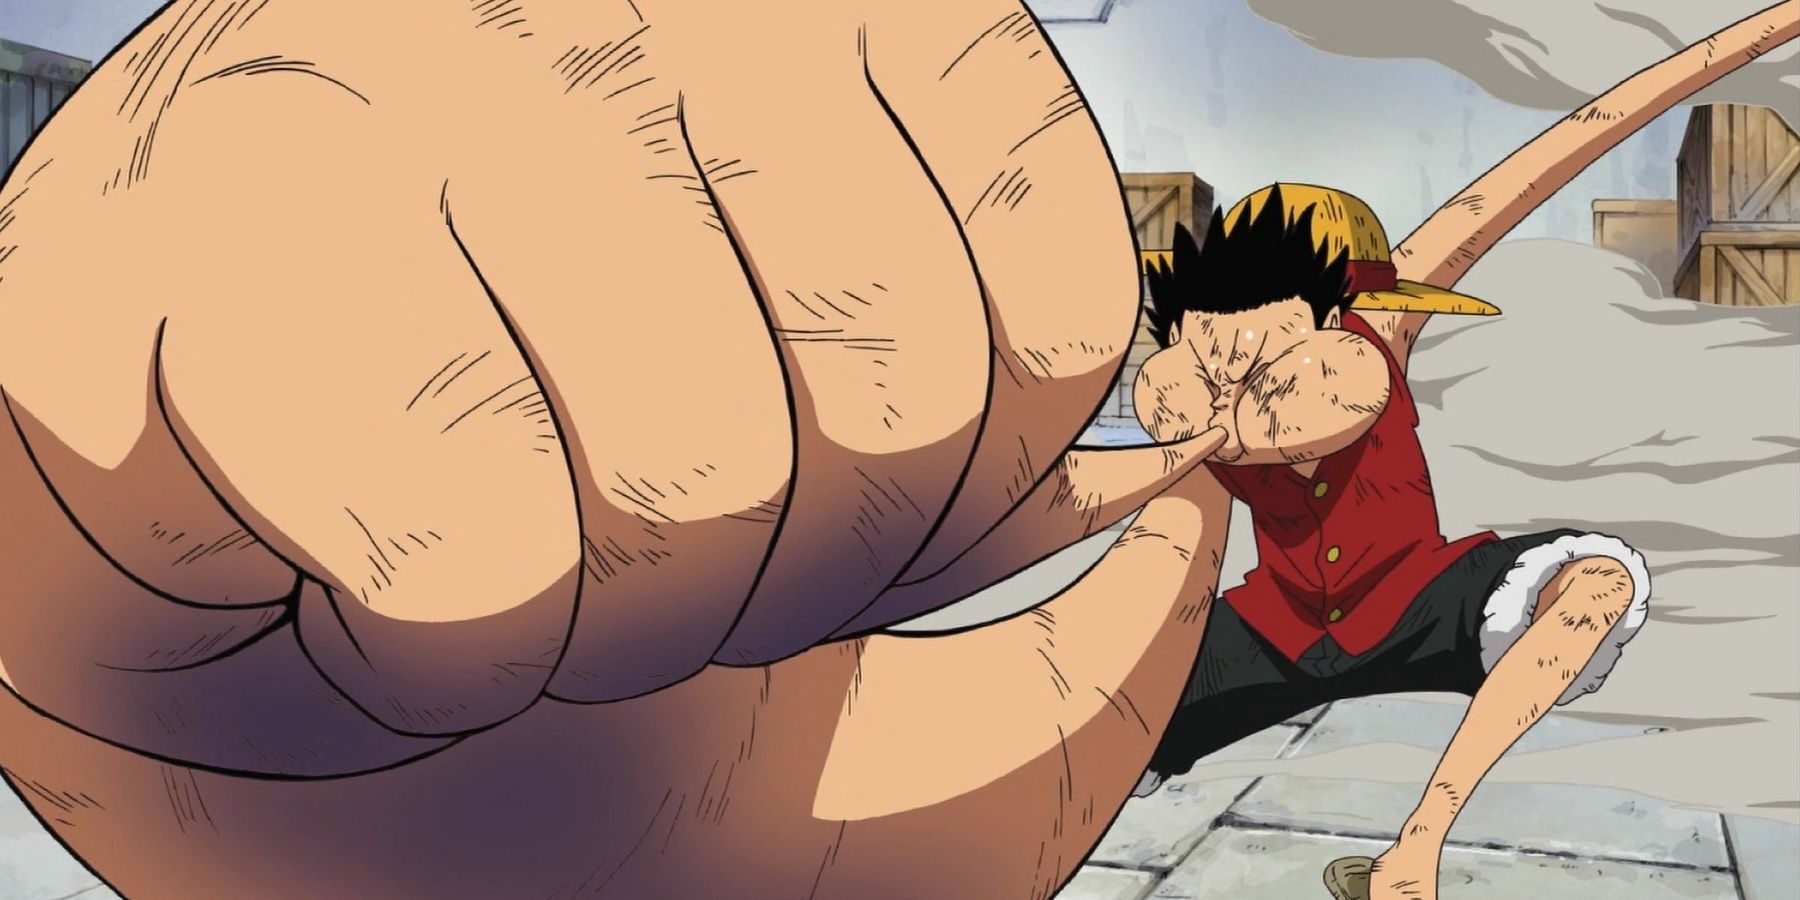 luffy is blowing up his hand with gear 3